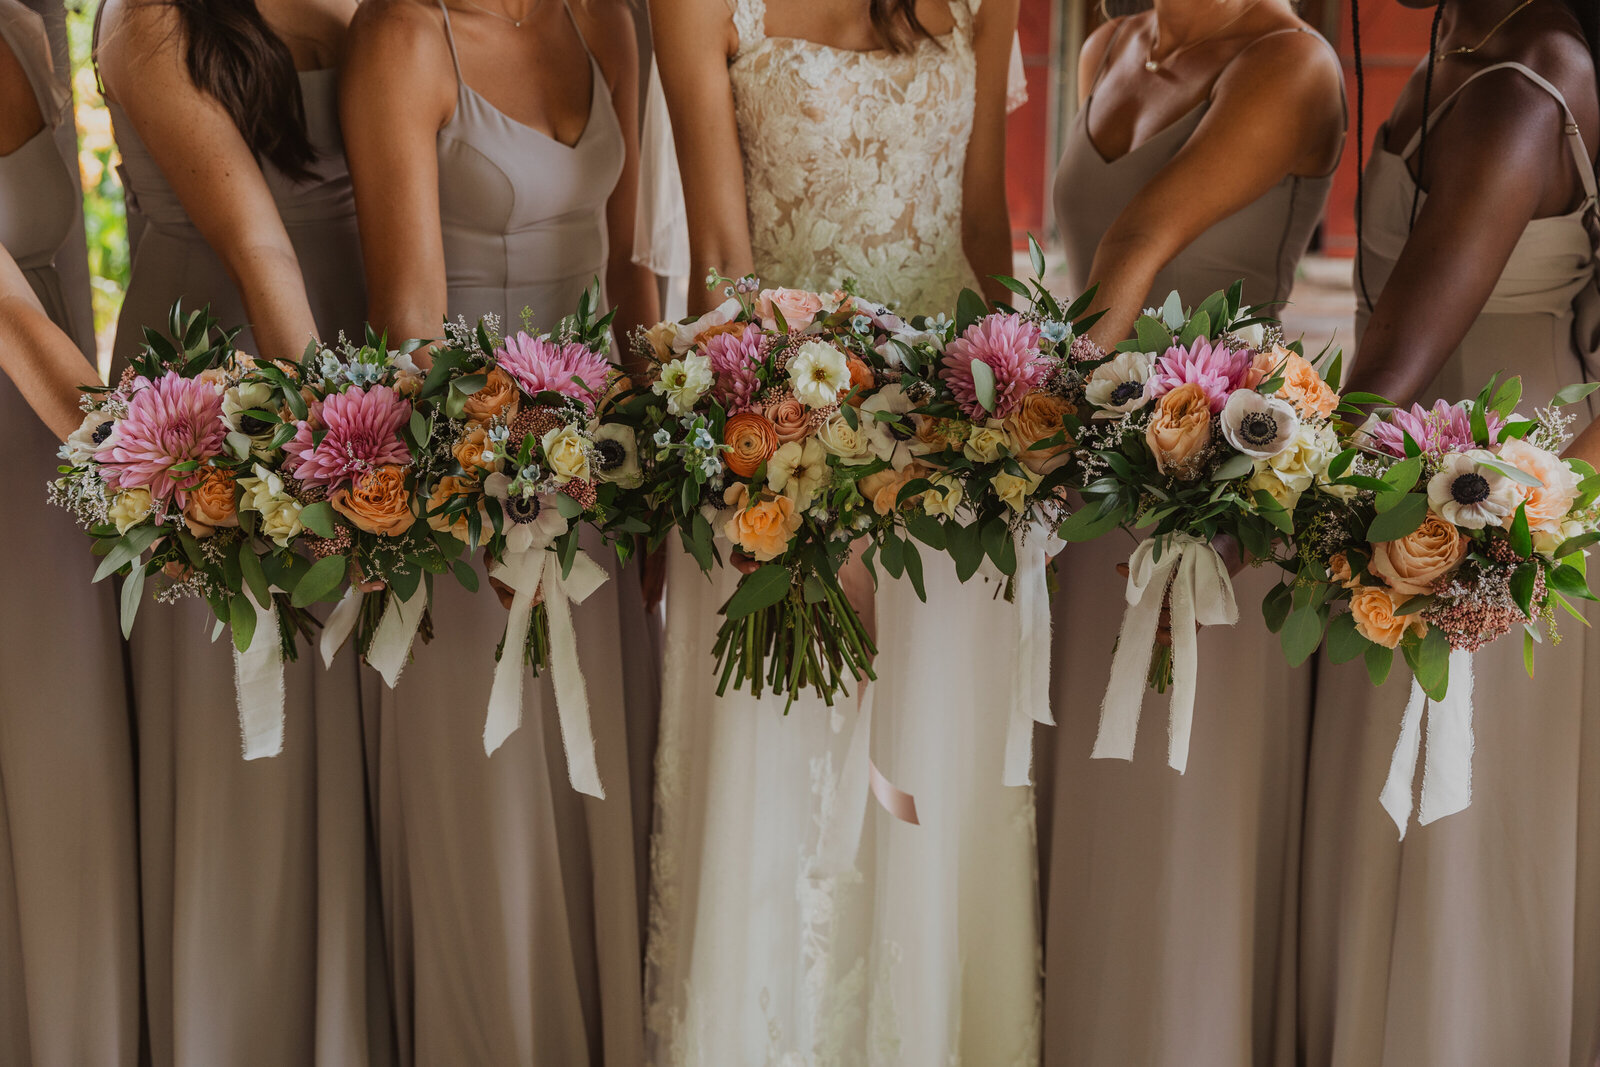 Lush bridesmaid bouquets with wildflowers and greenery for a touch of bohemian beauty.